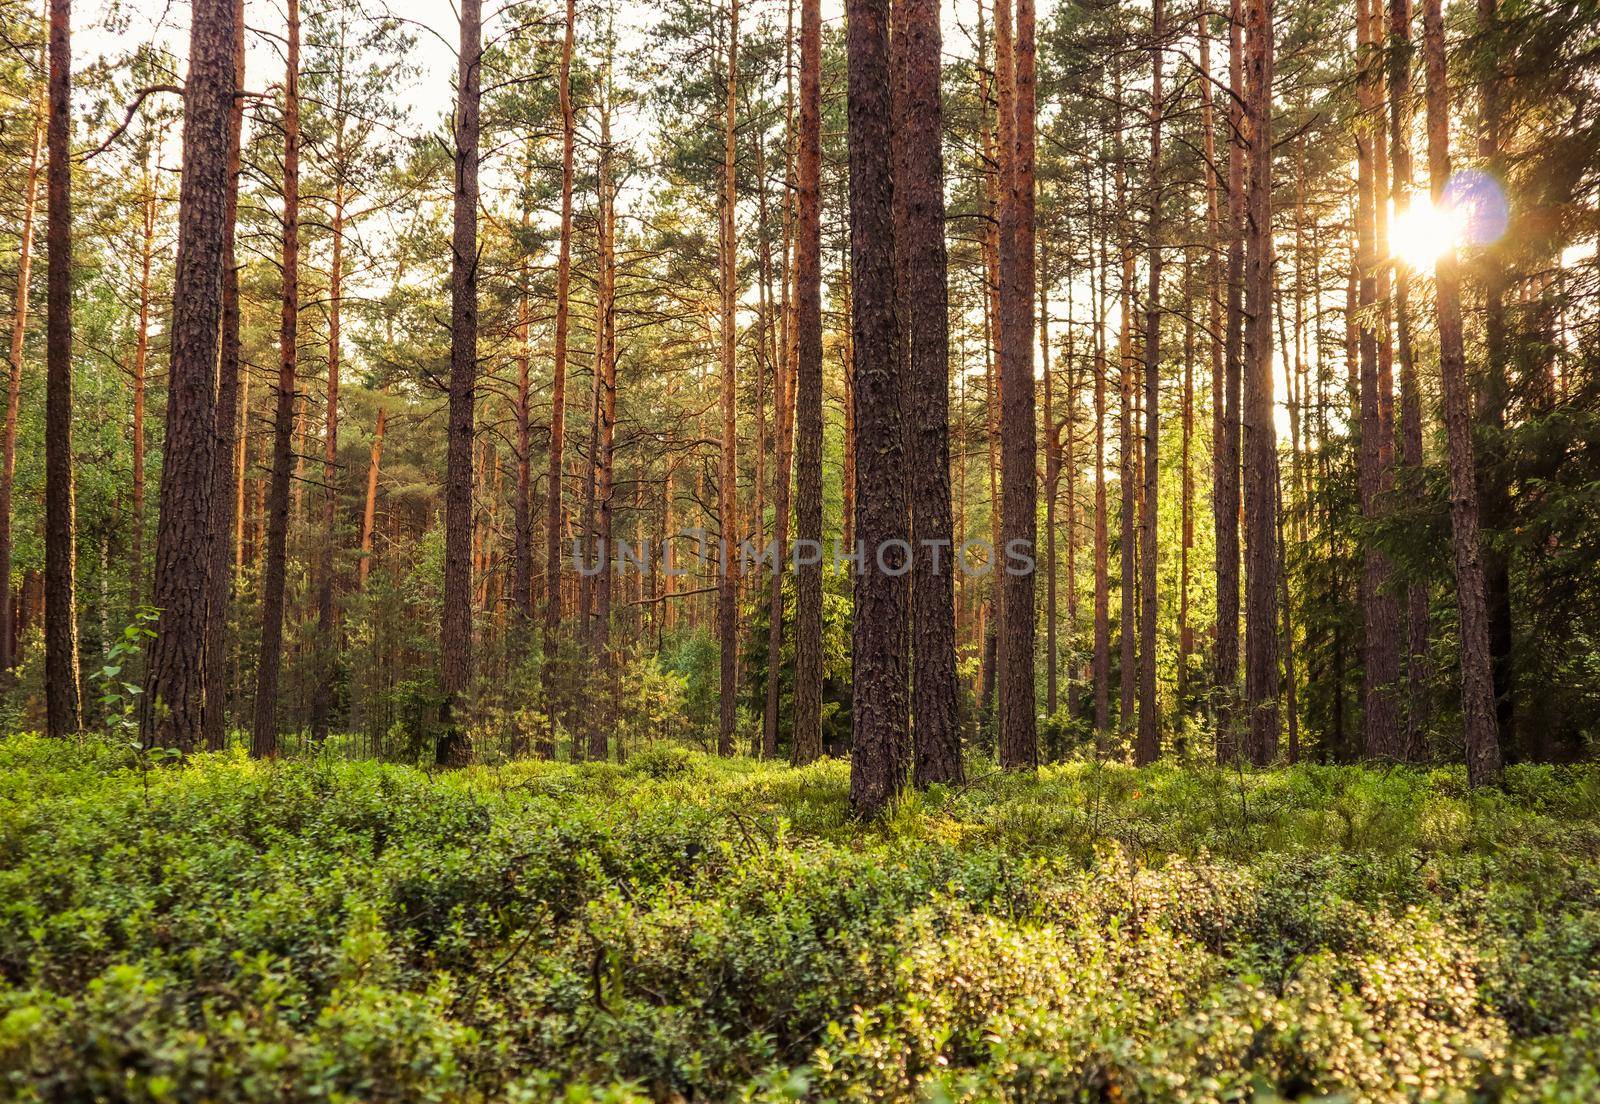 Sunlight on trees in a pine forest at sunset. Summer nature landscape.